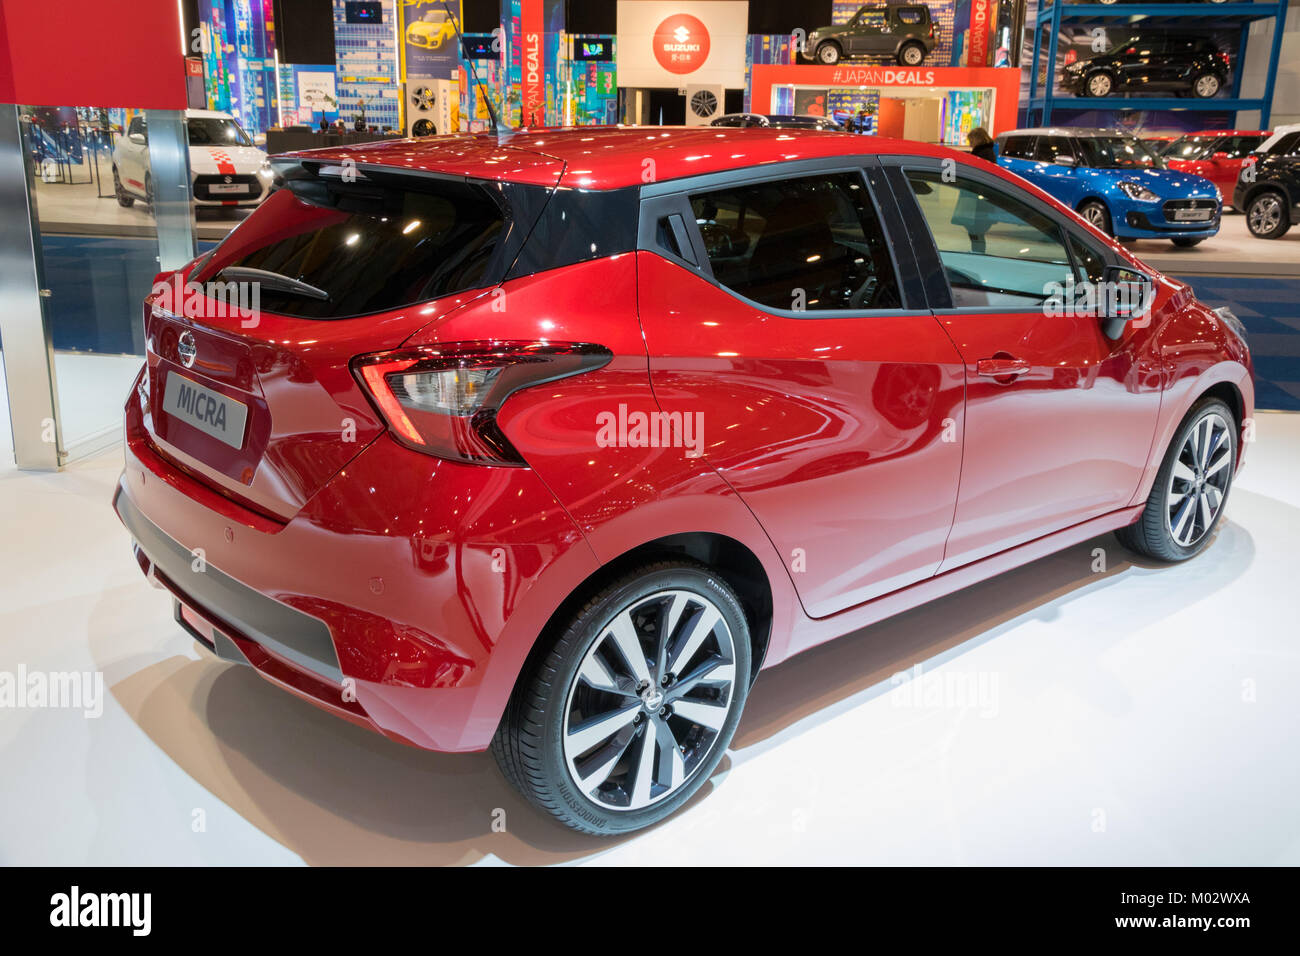 BRUSSELS - JAN 10, 2018: Nissan Micra car showcased at the Brussels Motor Show. Stock Photo